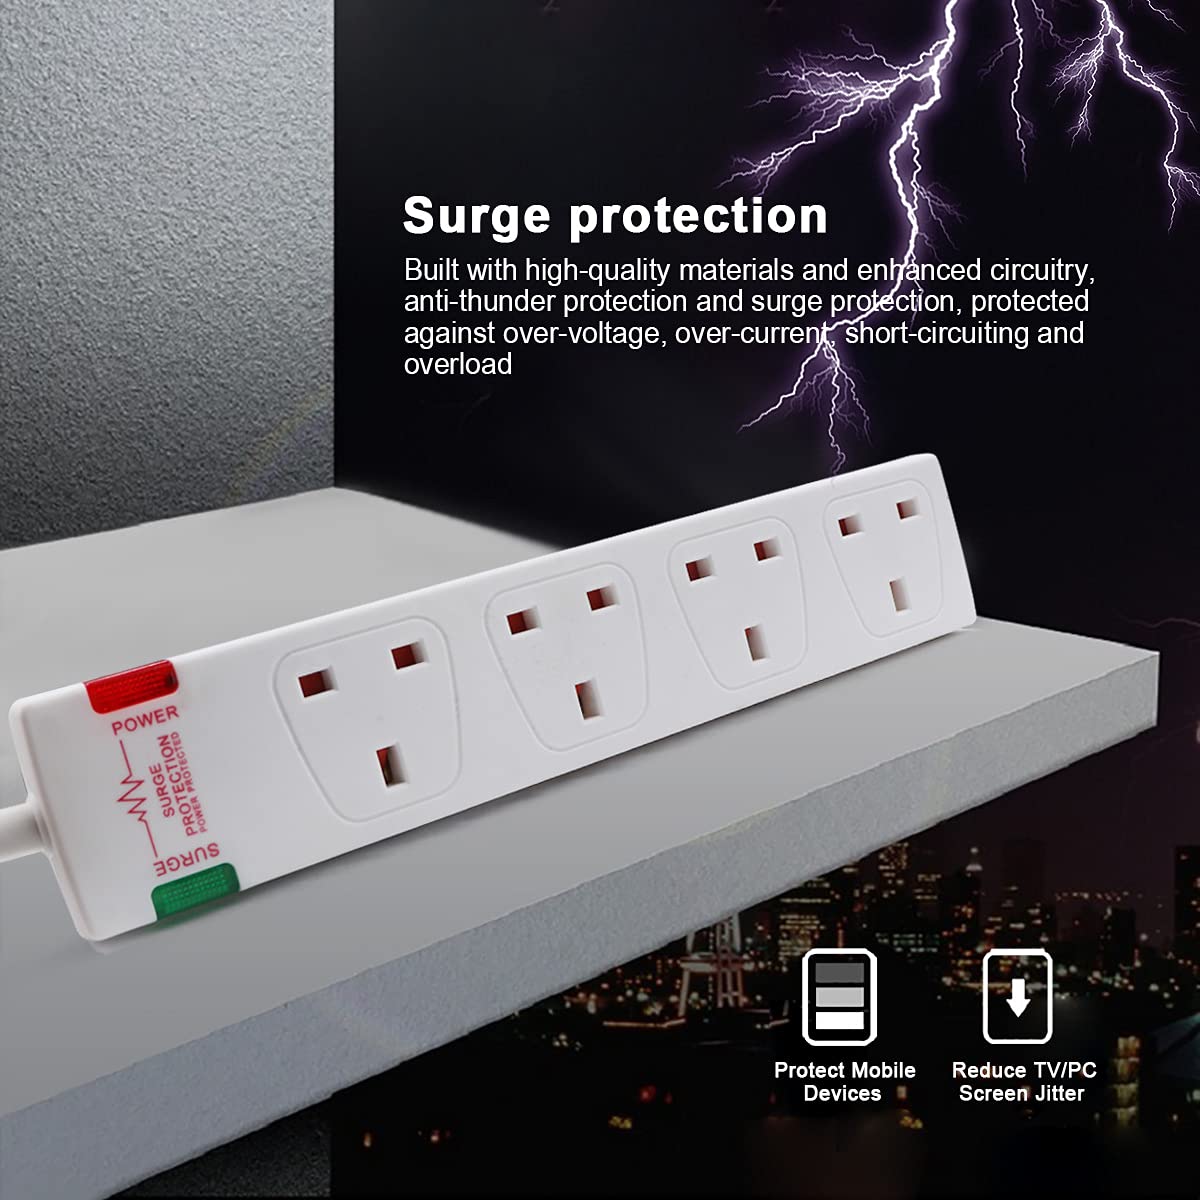 ExtraStar 4 Way Extension Lead with Surge Protection, 13A/250V~ Multi Sockets Power Strips, 3120W Fused UK Plug Wall Mounted Power Socket with 5M Extension Cord-White